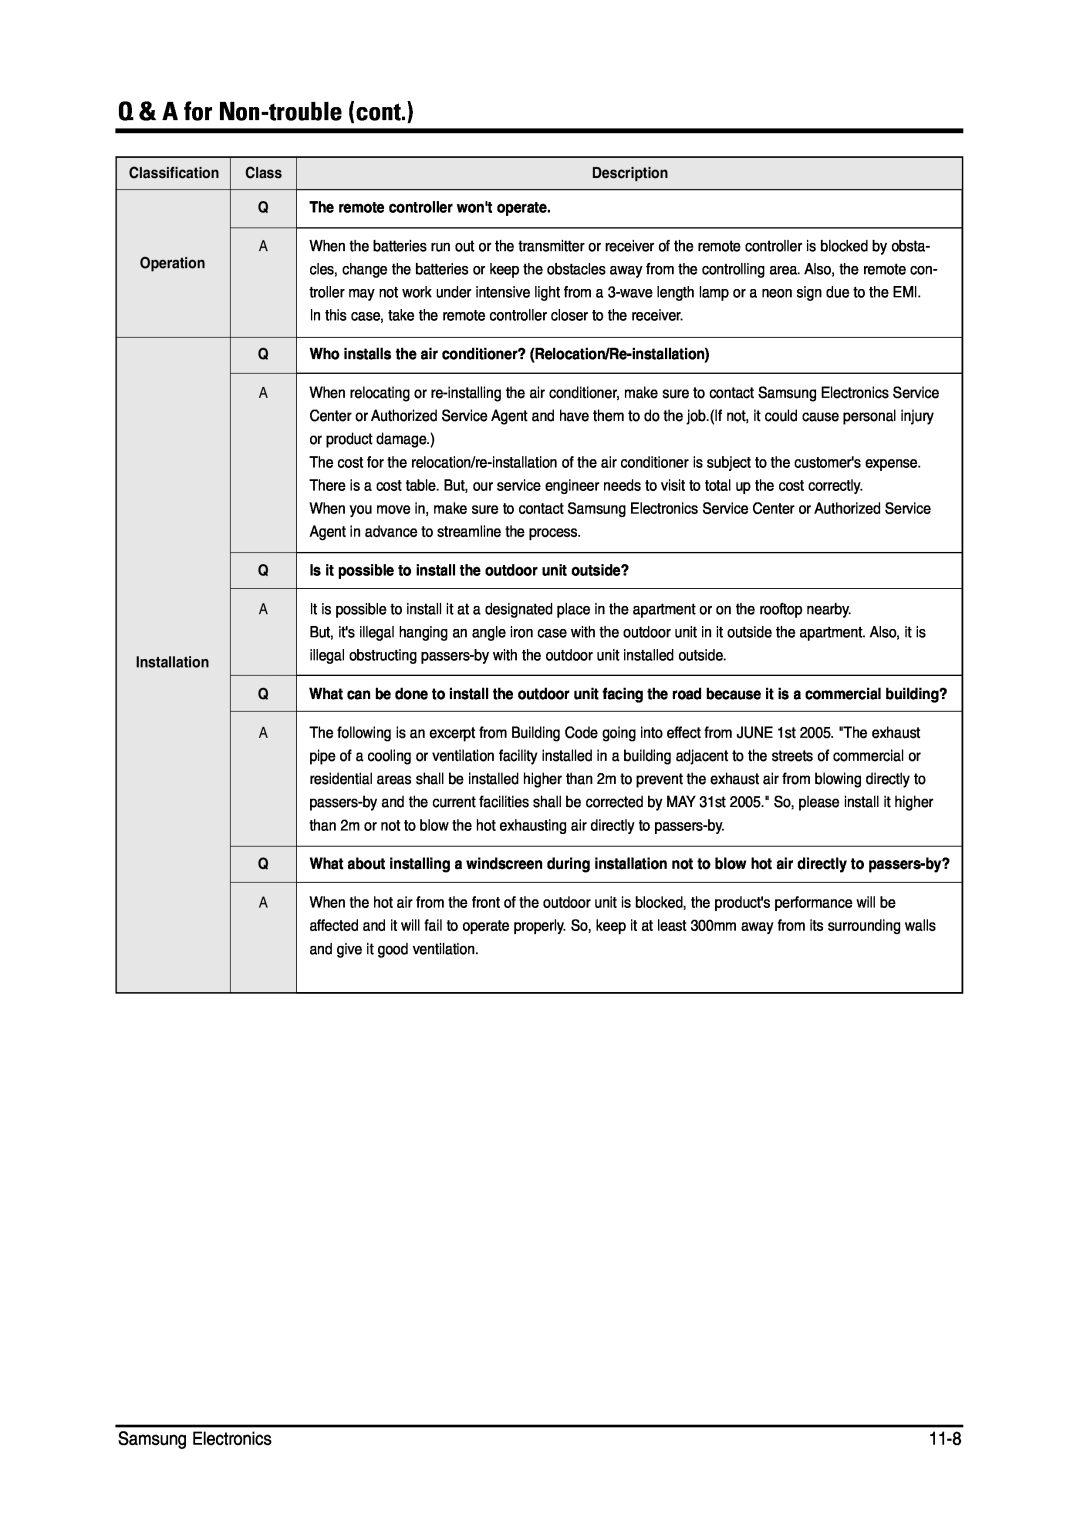 Samsung MH026FNCA service manual Q & A for Non-troublecont, Samsung Electronics, 11-8 